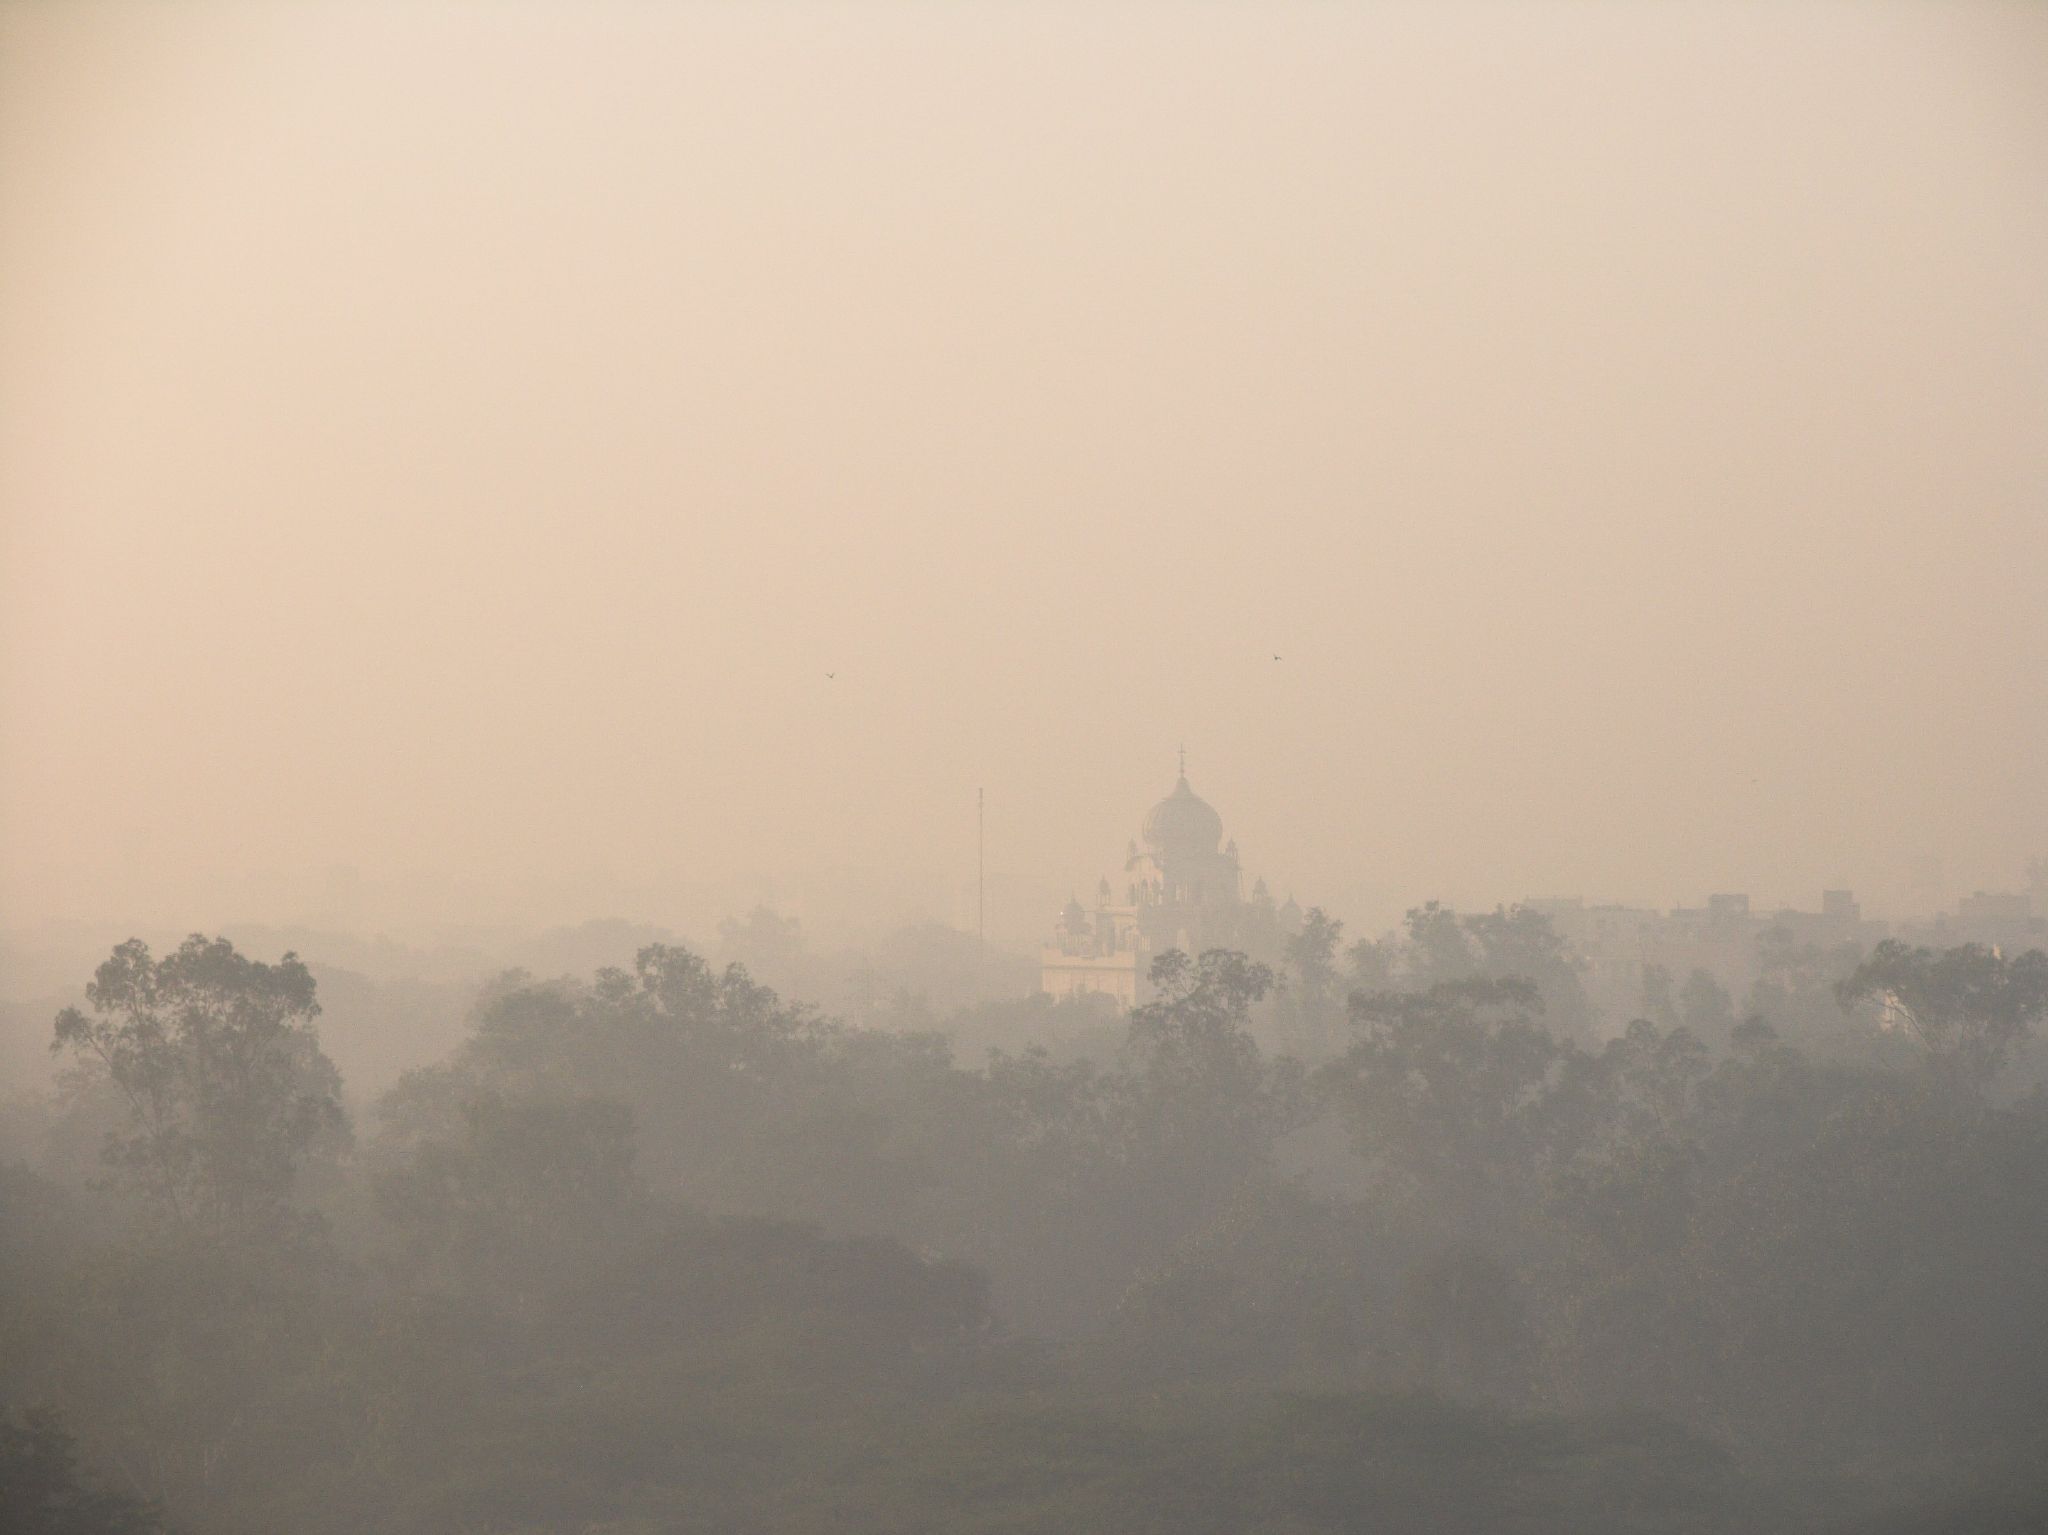 New Delhi covered by smog at dawn